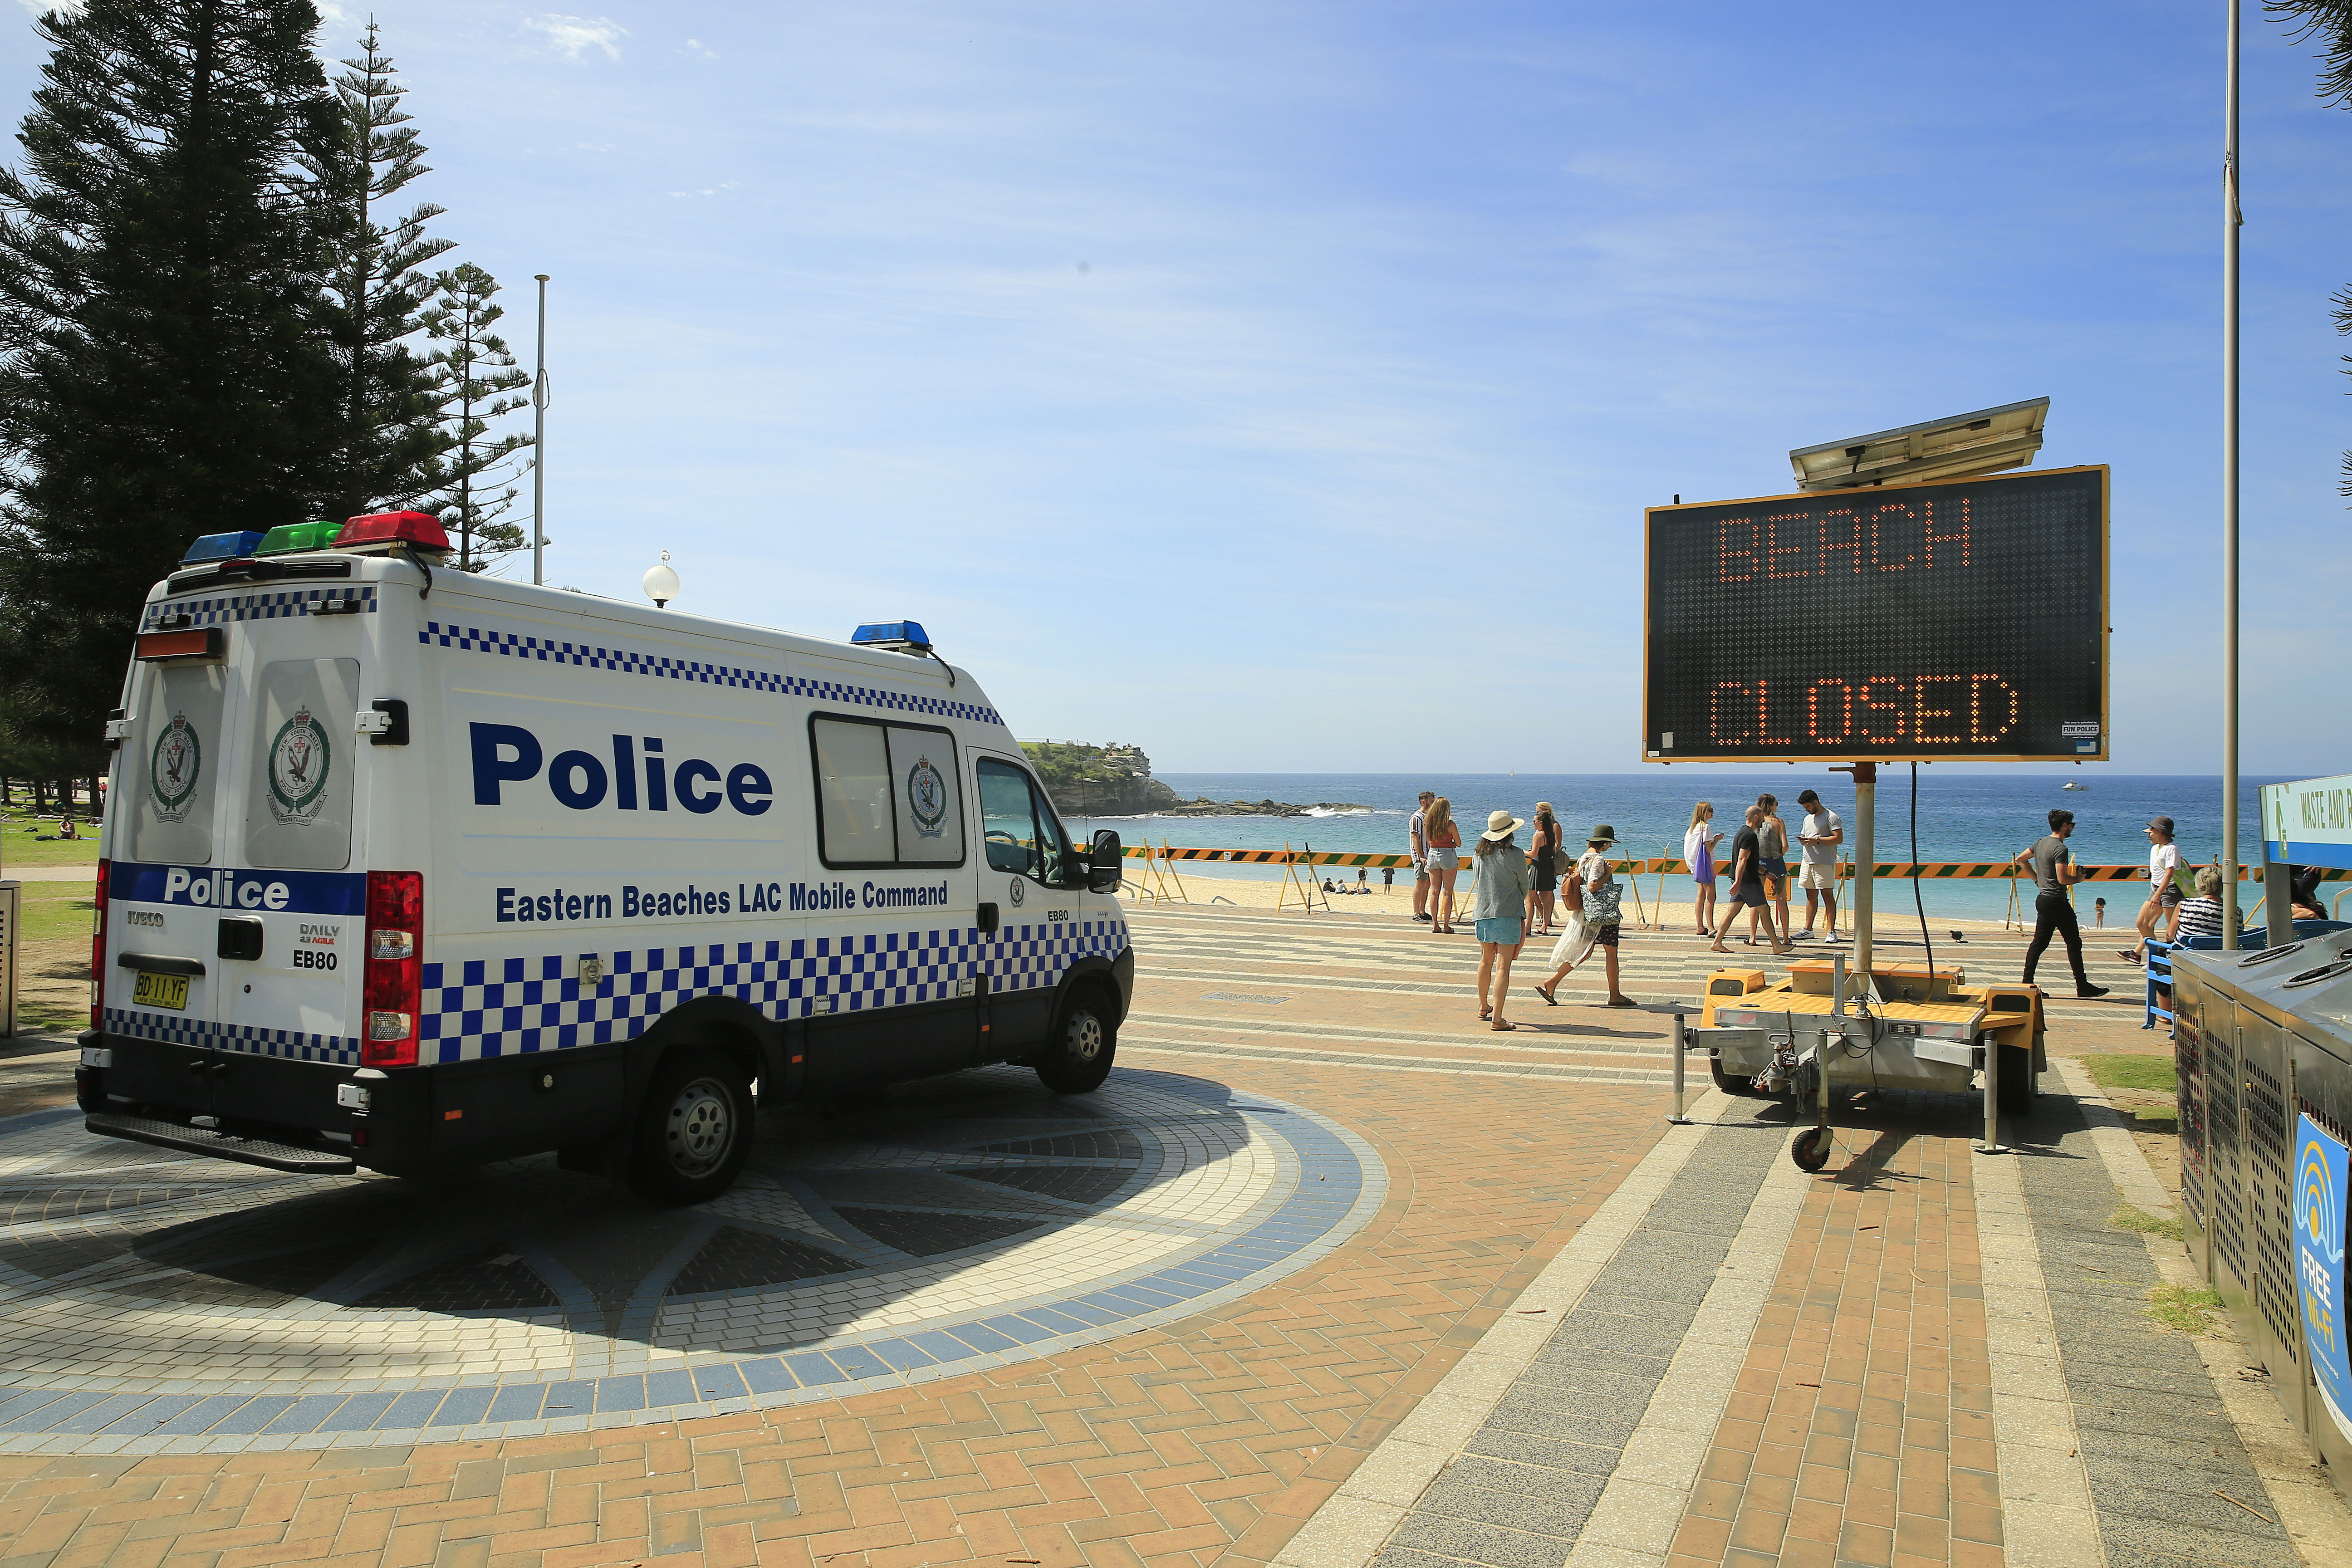 Randwick Council closed Coogee Beach on March 28 after people ignored social distancing rules. It will reopen for exercise only from Monday April 20.